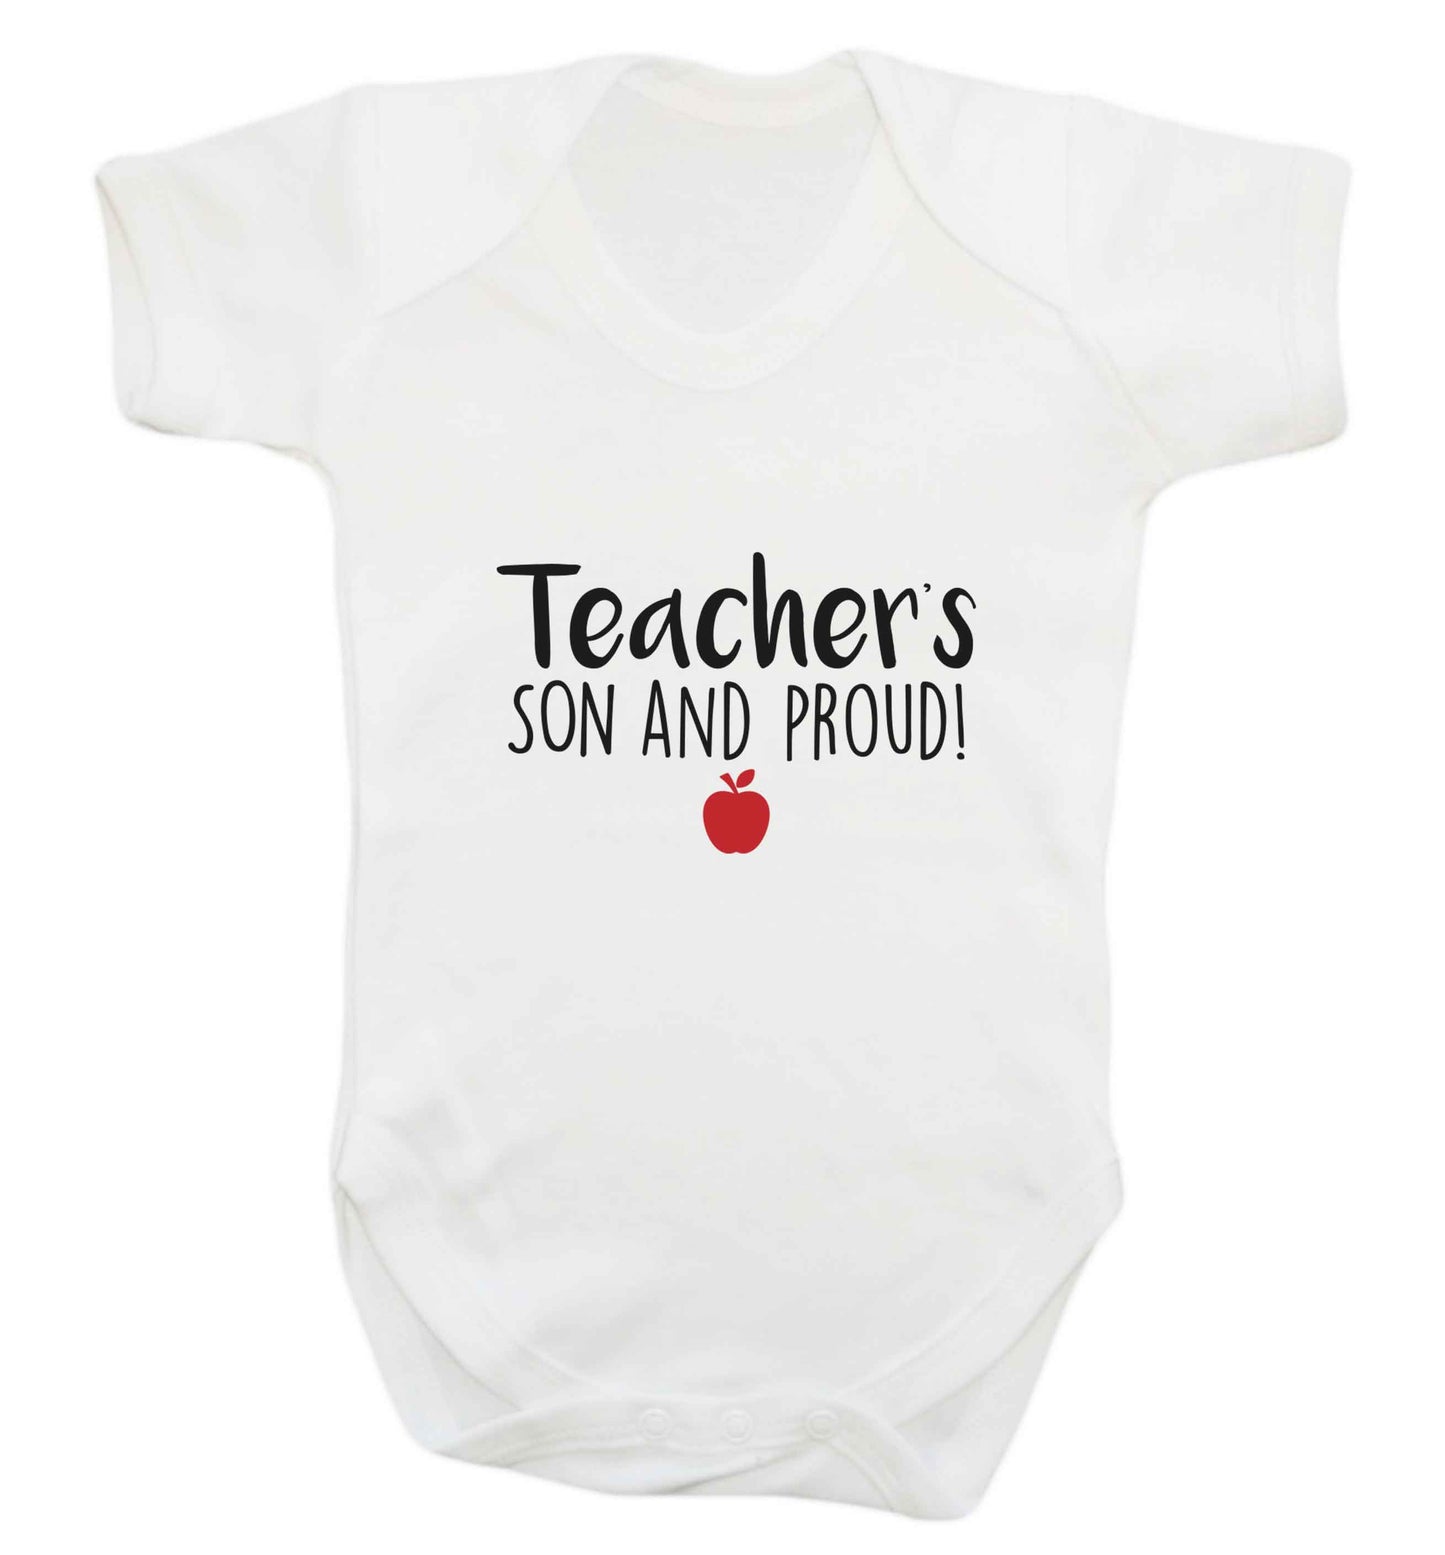 Teachers son and proud baby vest white 18-24 months